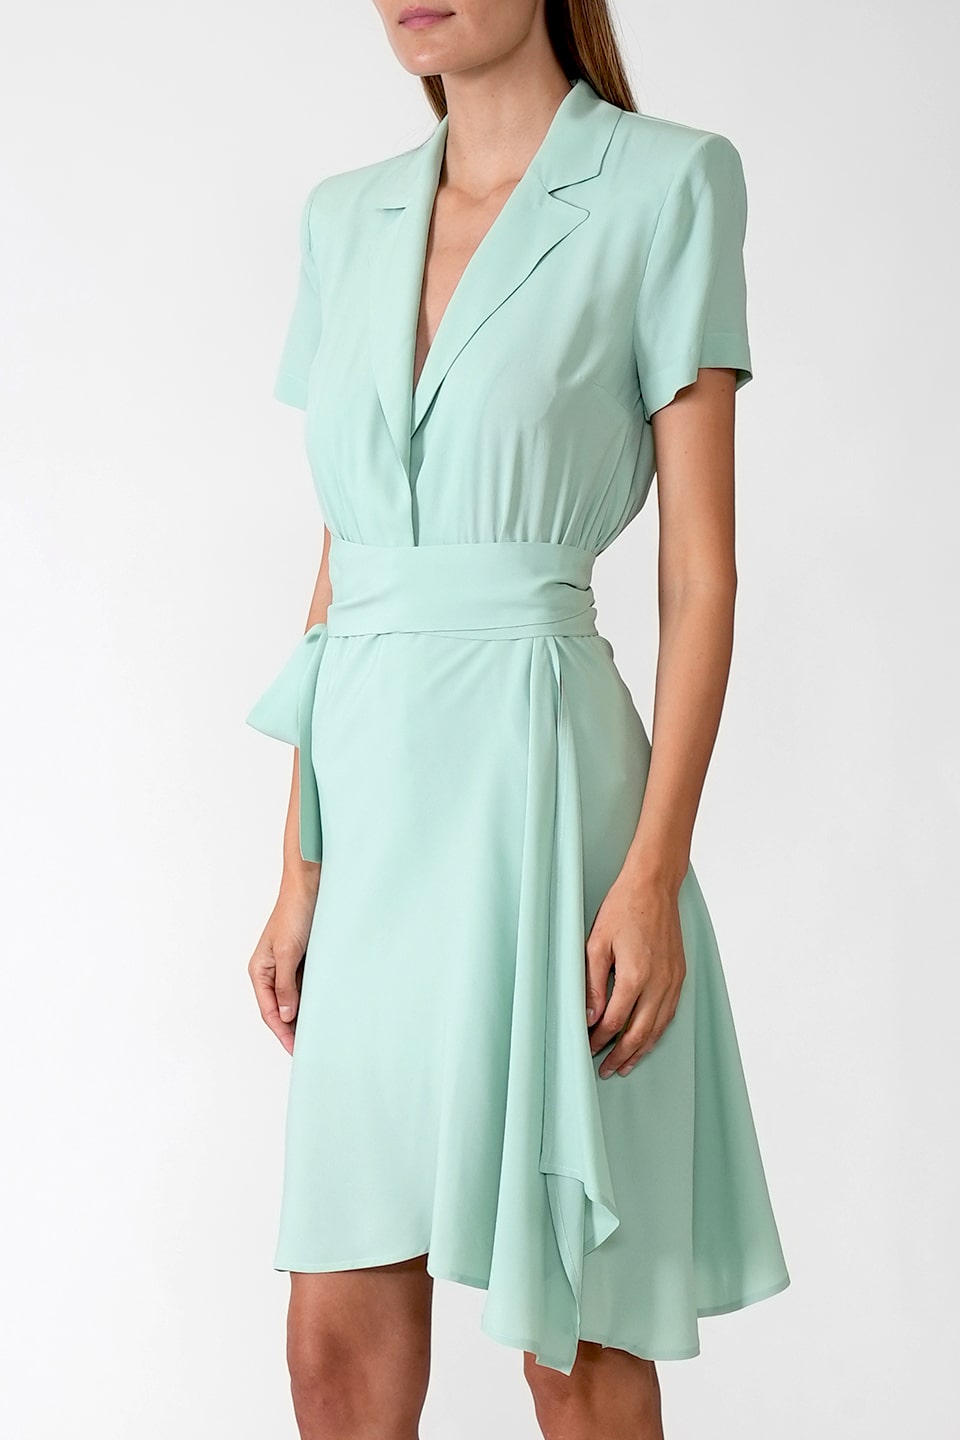 Designer Green Midi dresses, shop online with free delivery in UAE. Product gallery 2